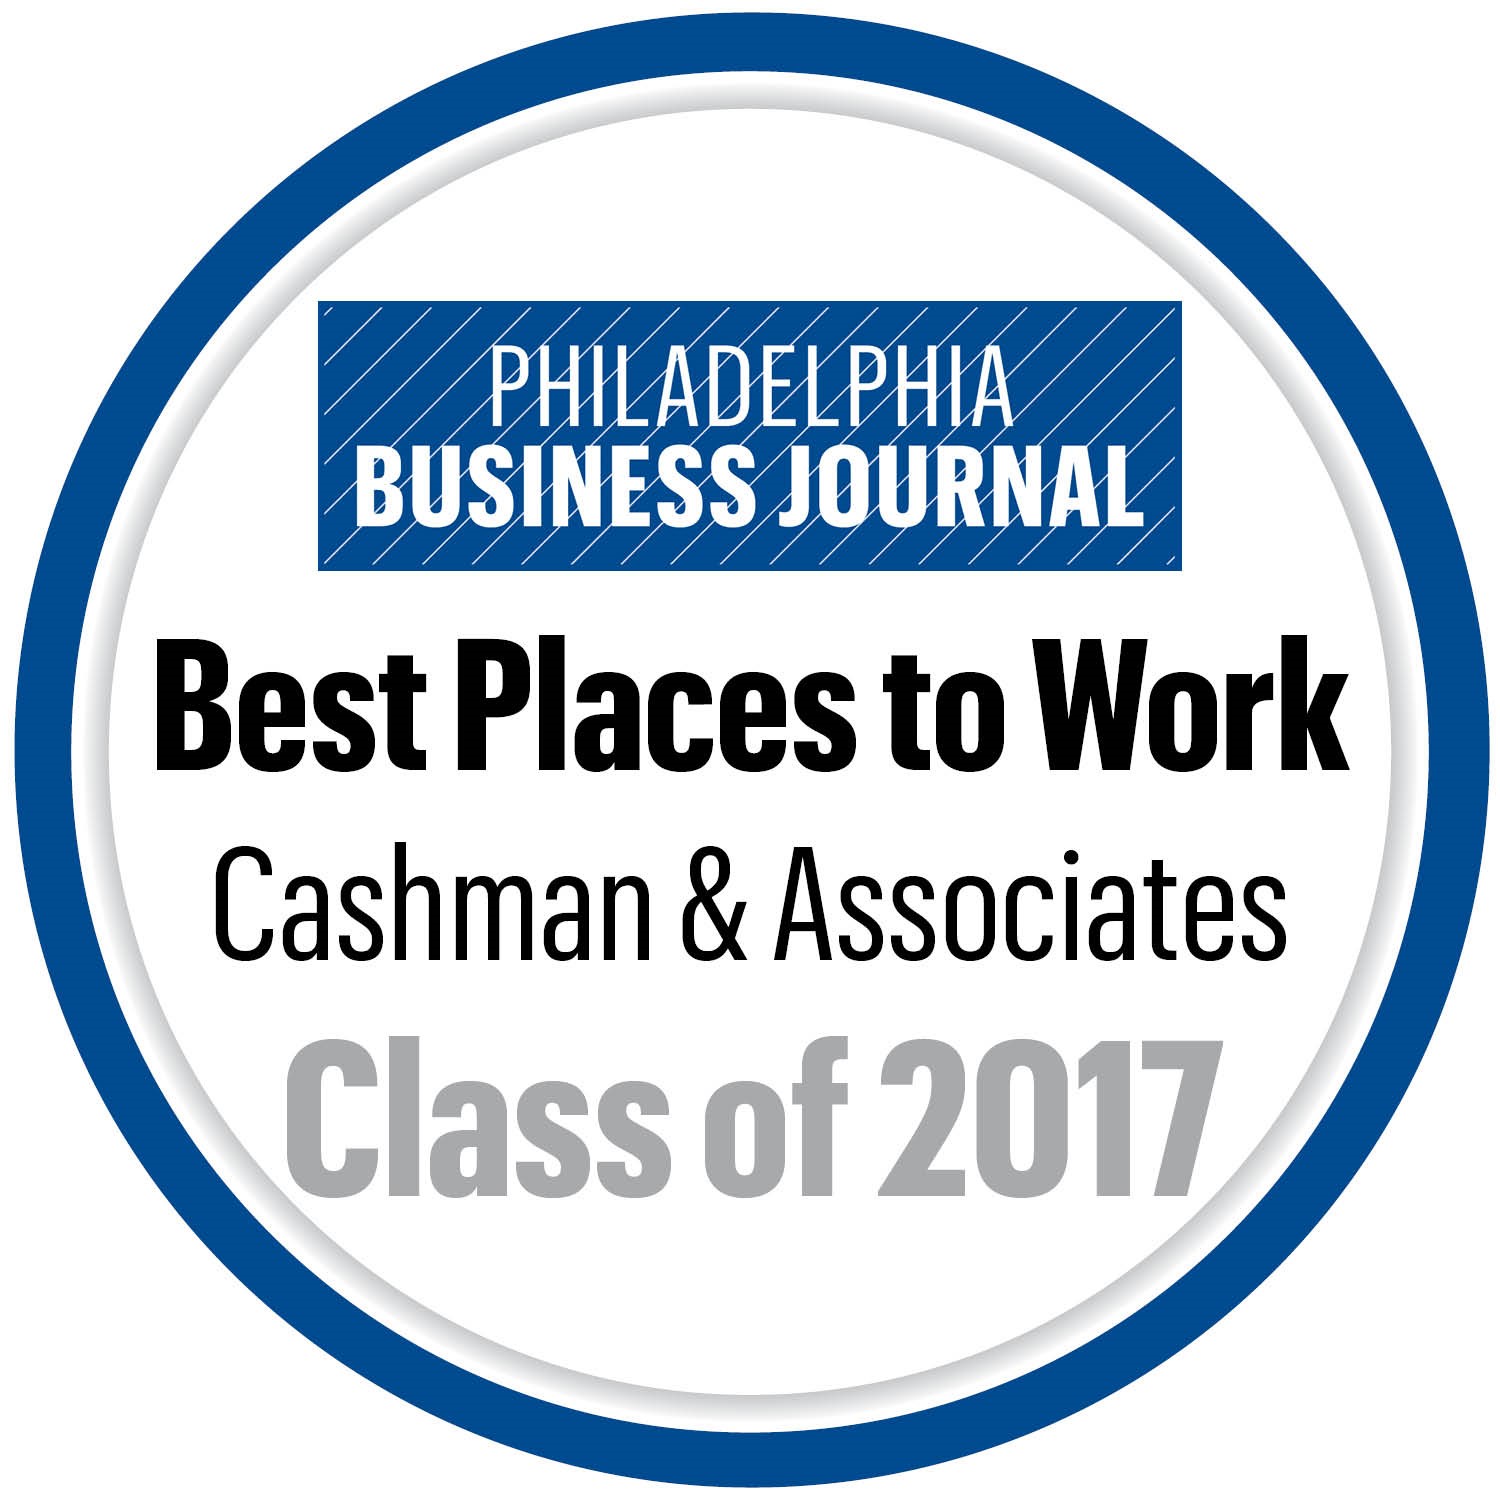 Philadelphia Business Journal Best Places to Work 2017